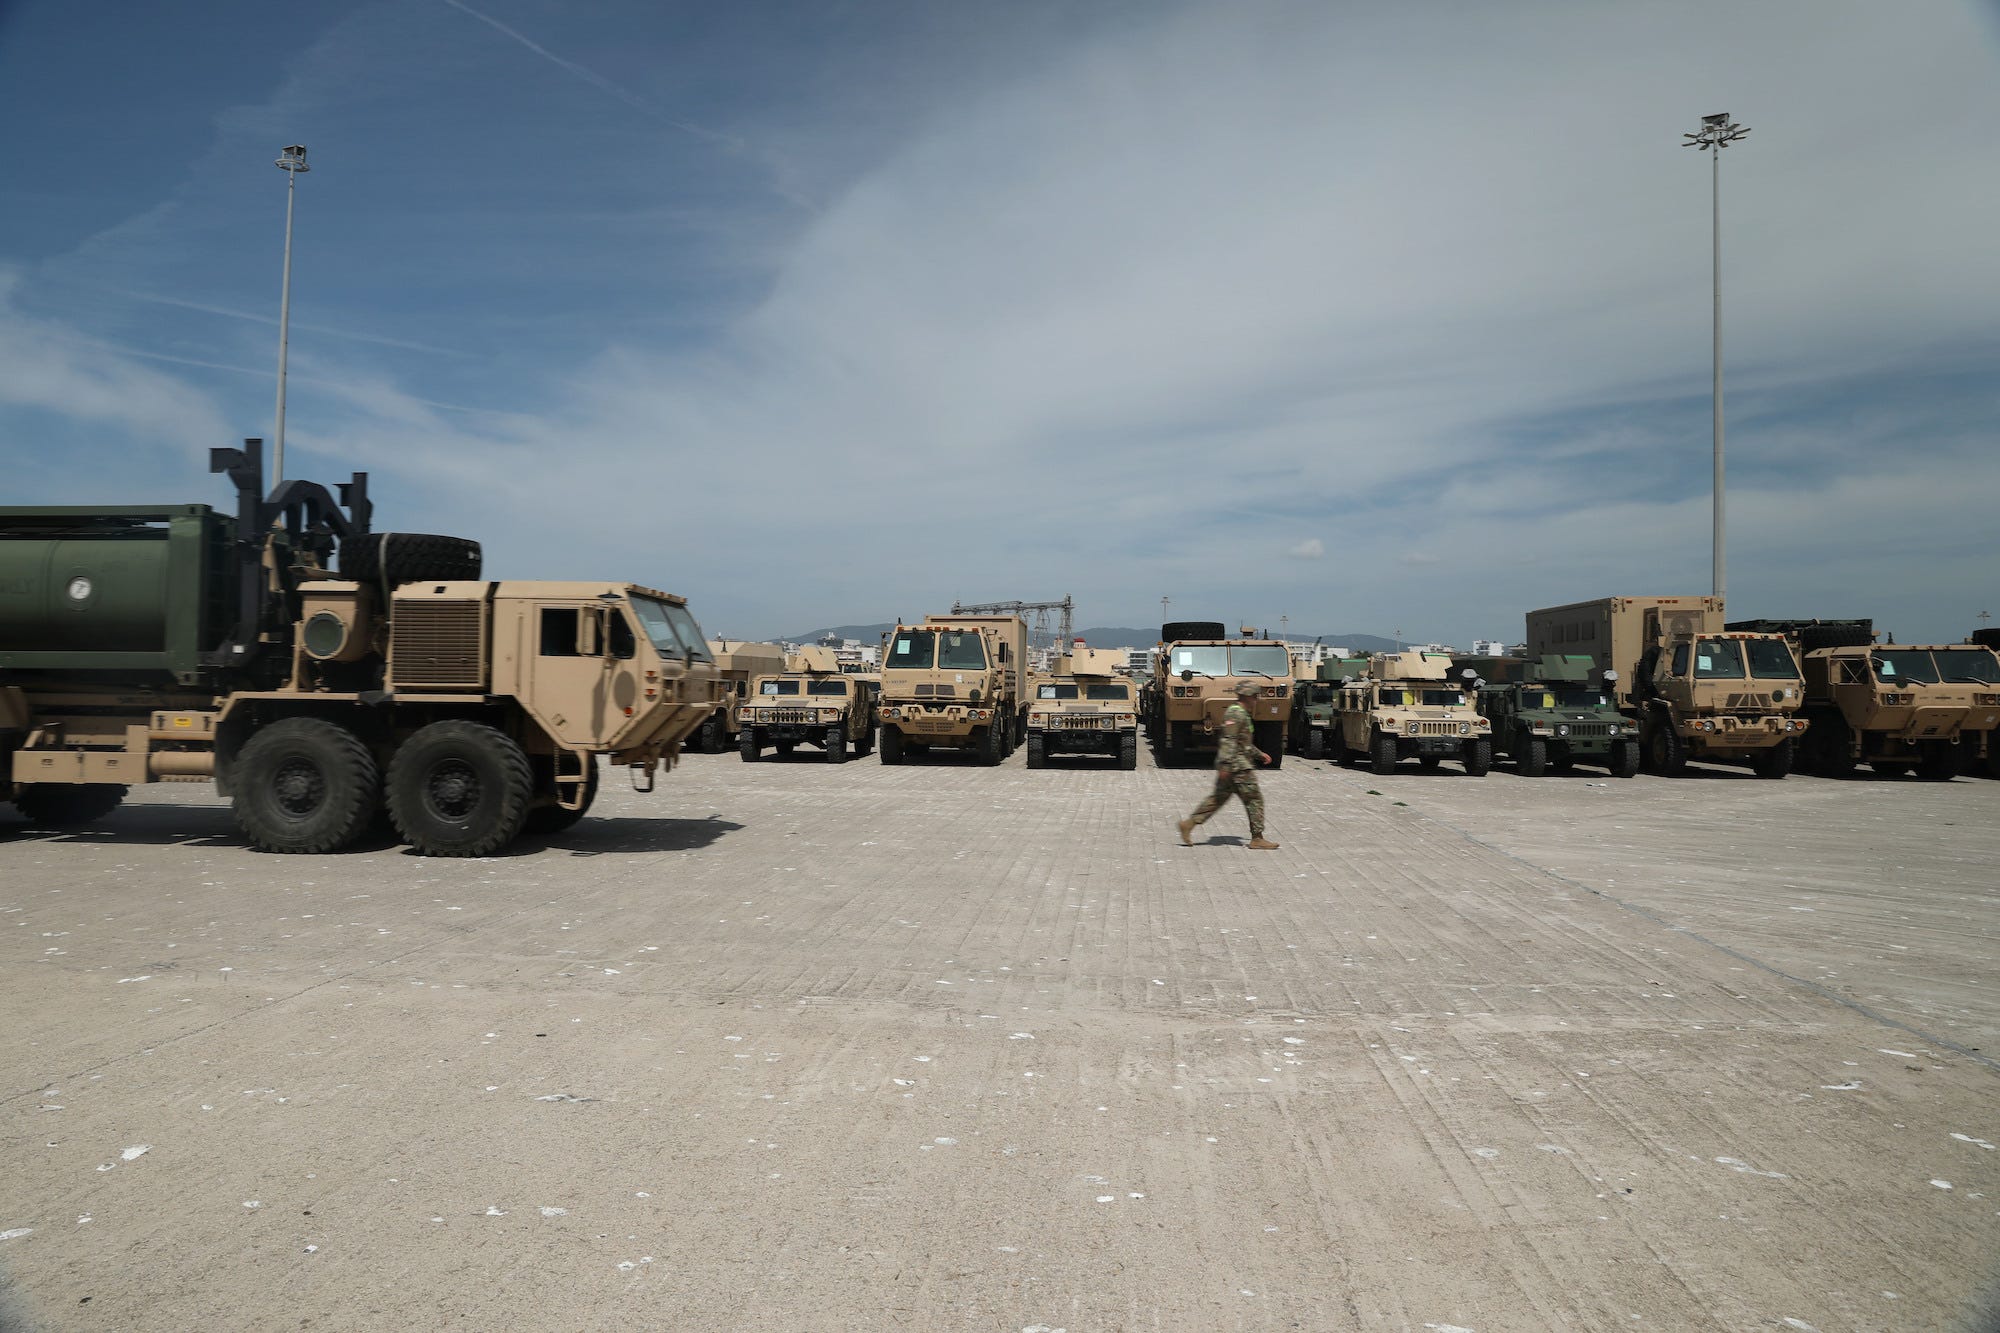 US Army soldiers and vehicles in port at Alexandroupolis Greece